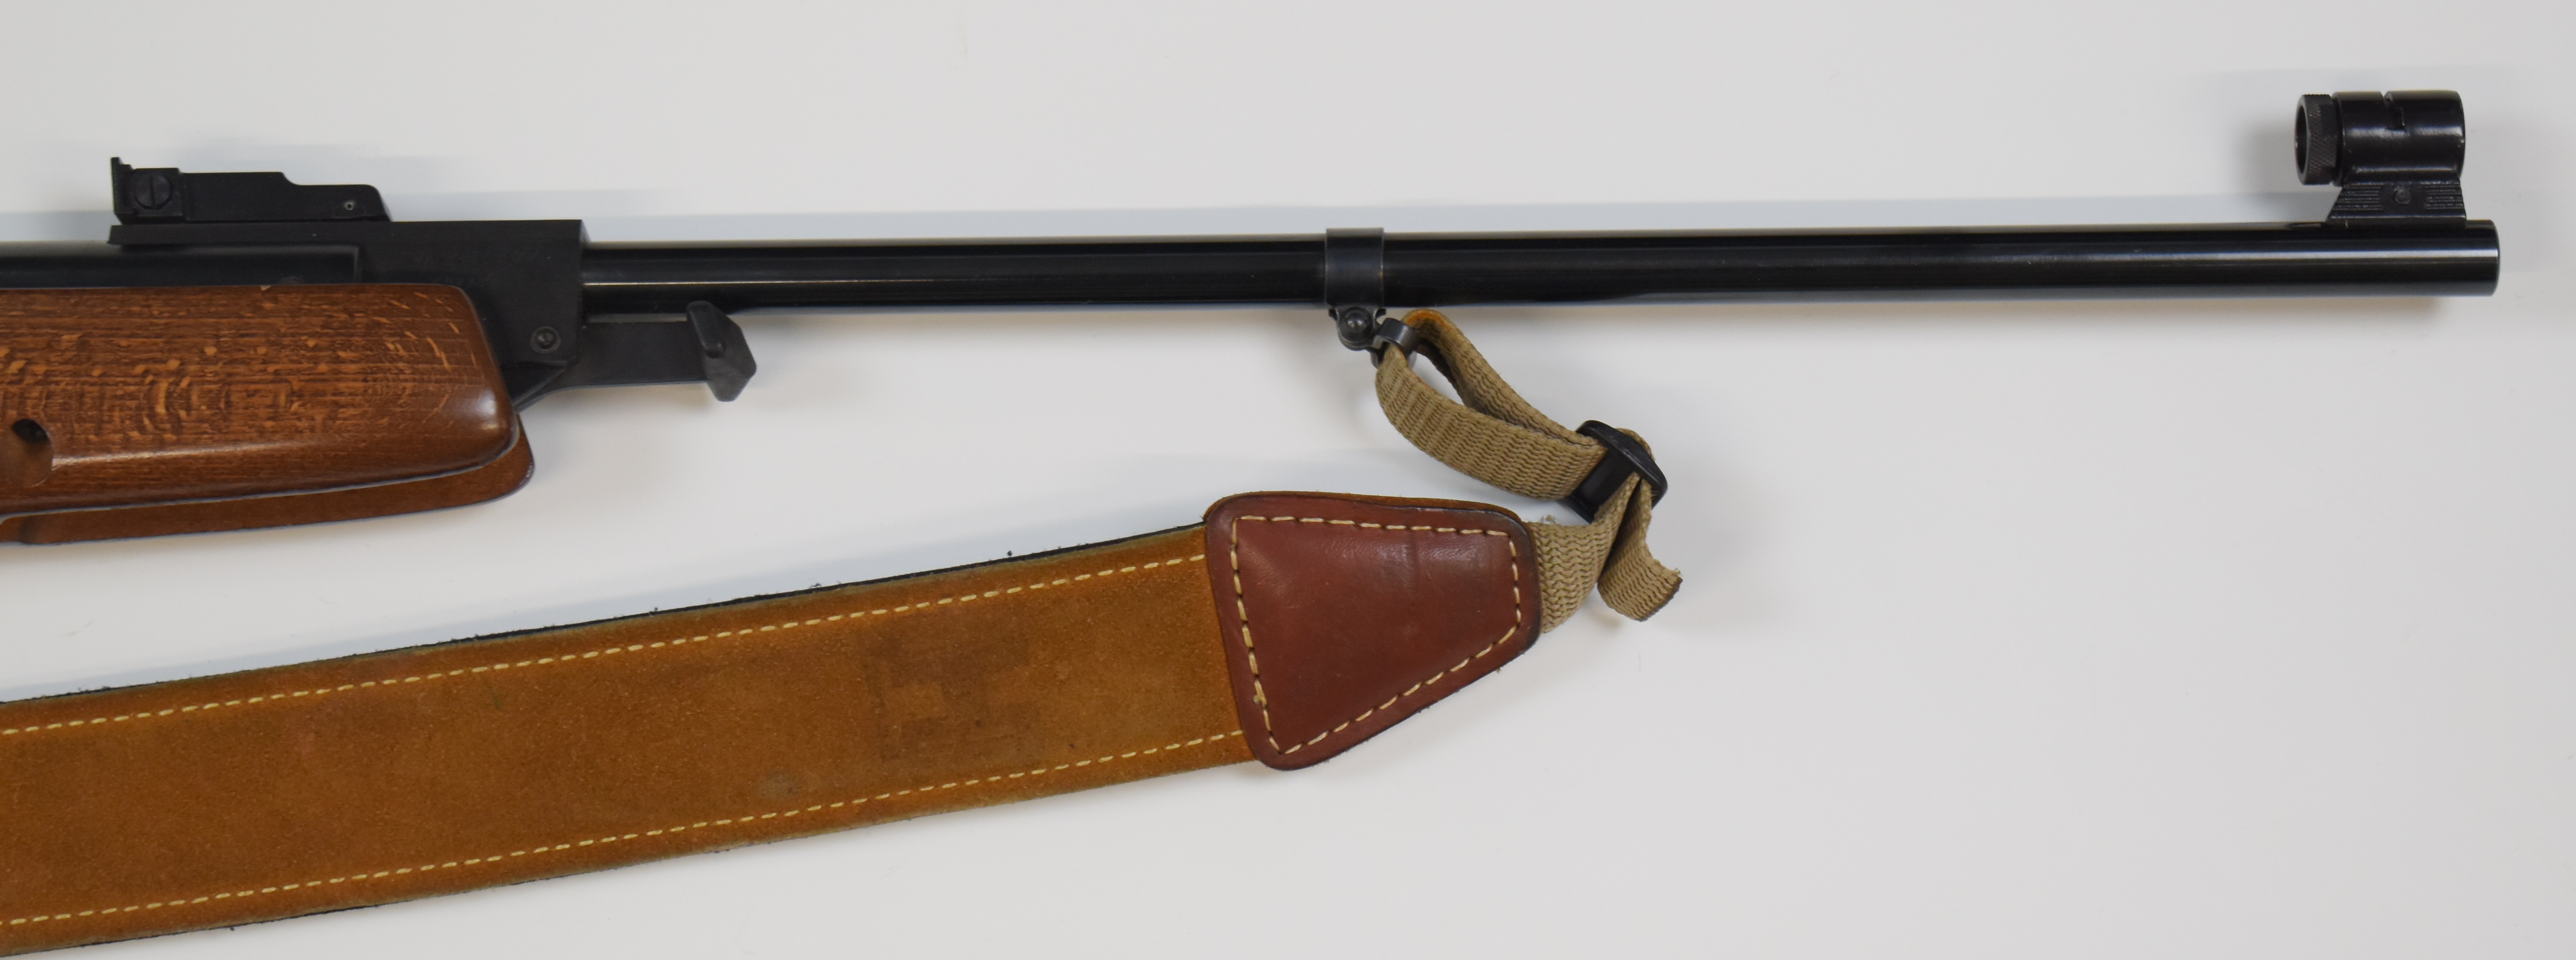 Webley Omega .177 air rifle with chequered semi-pistol grip, raised cheek piece, padded canvas and - Image 5 of 12